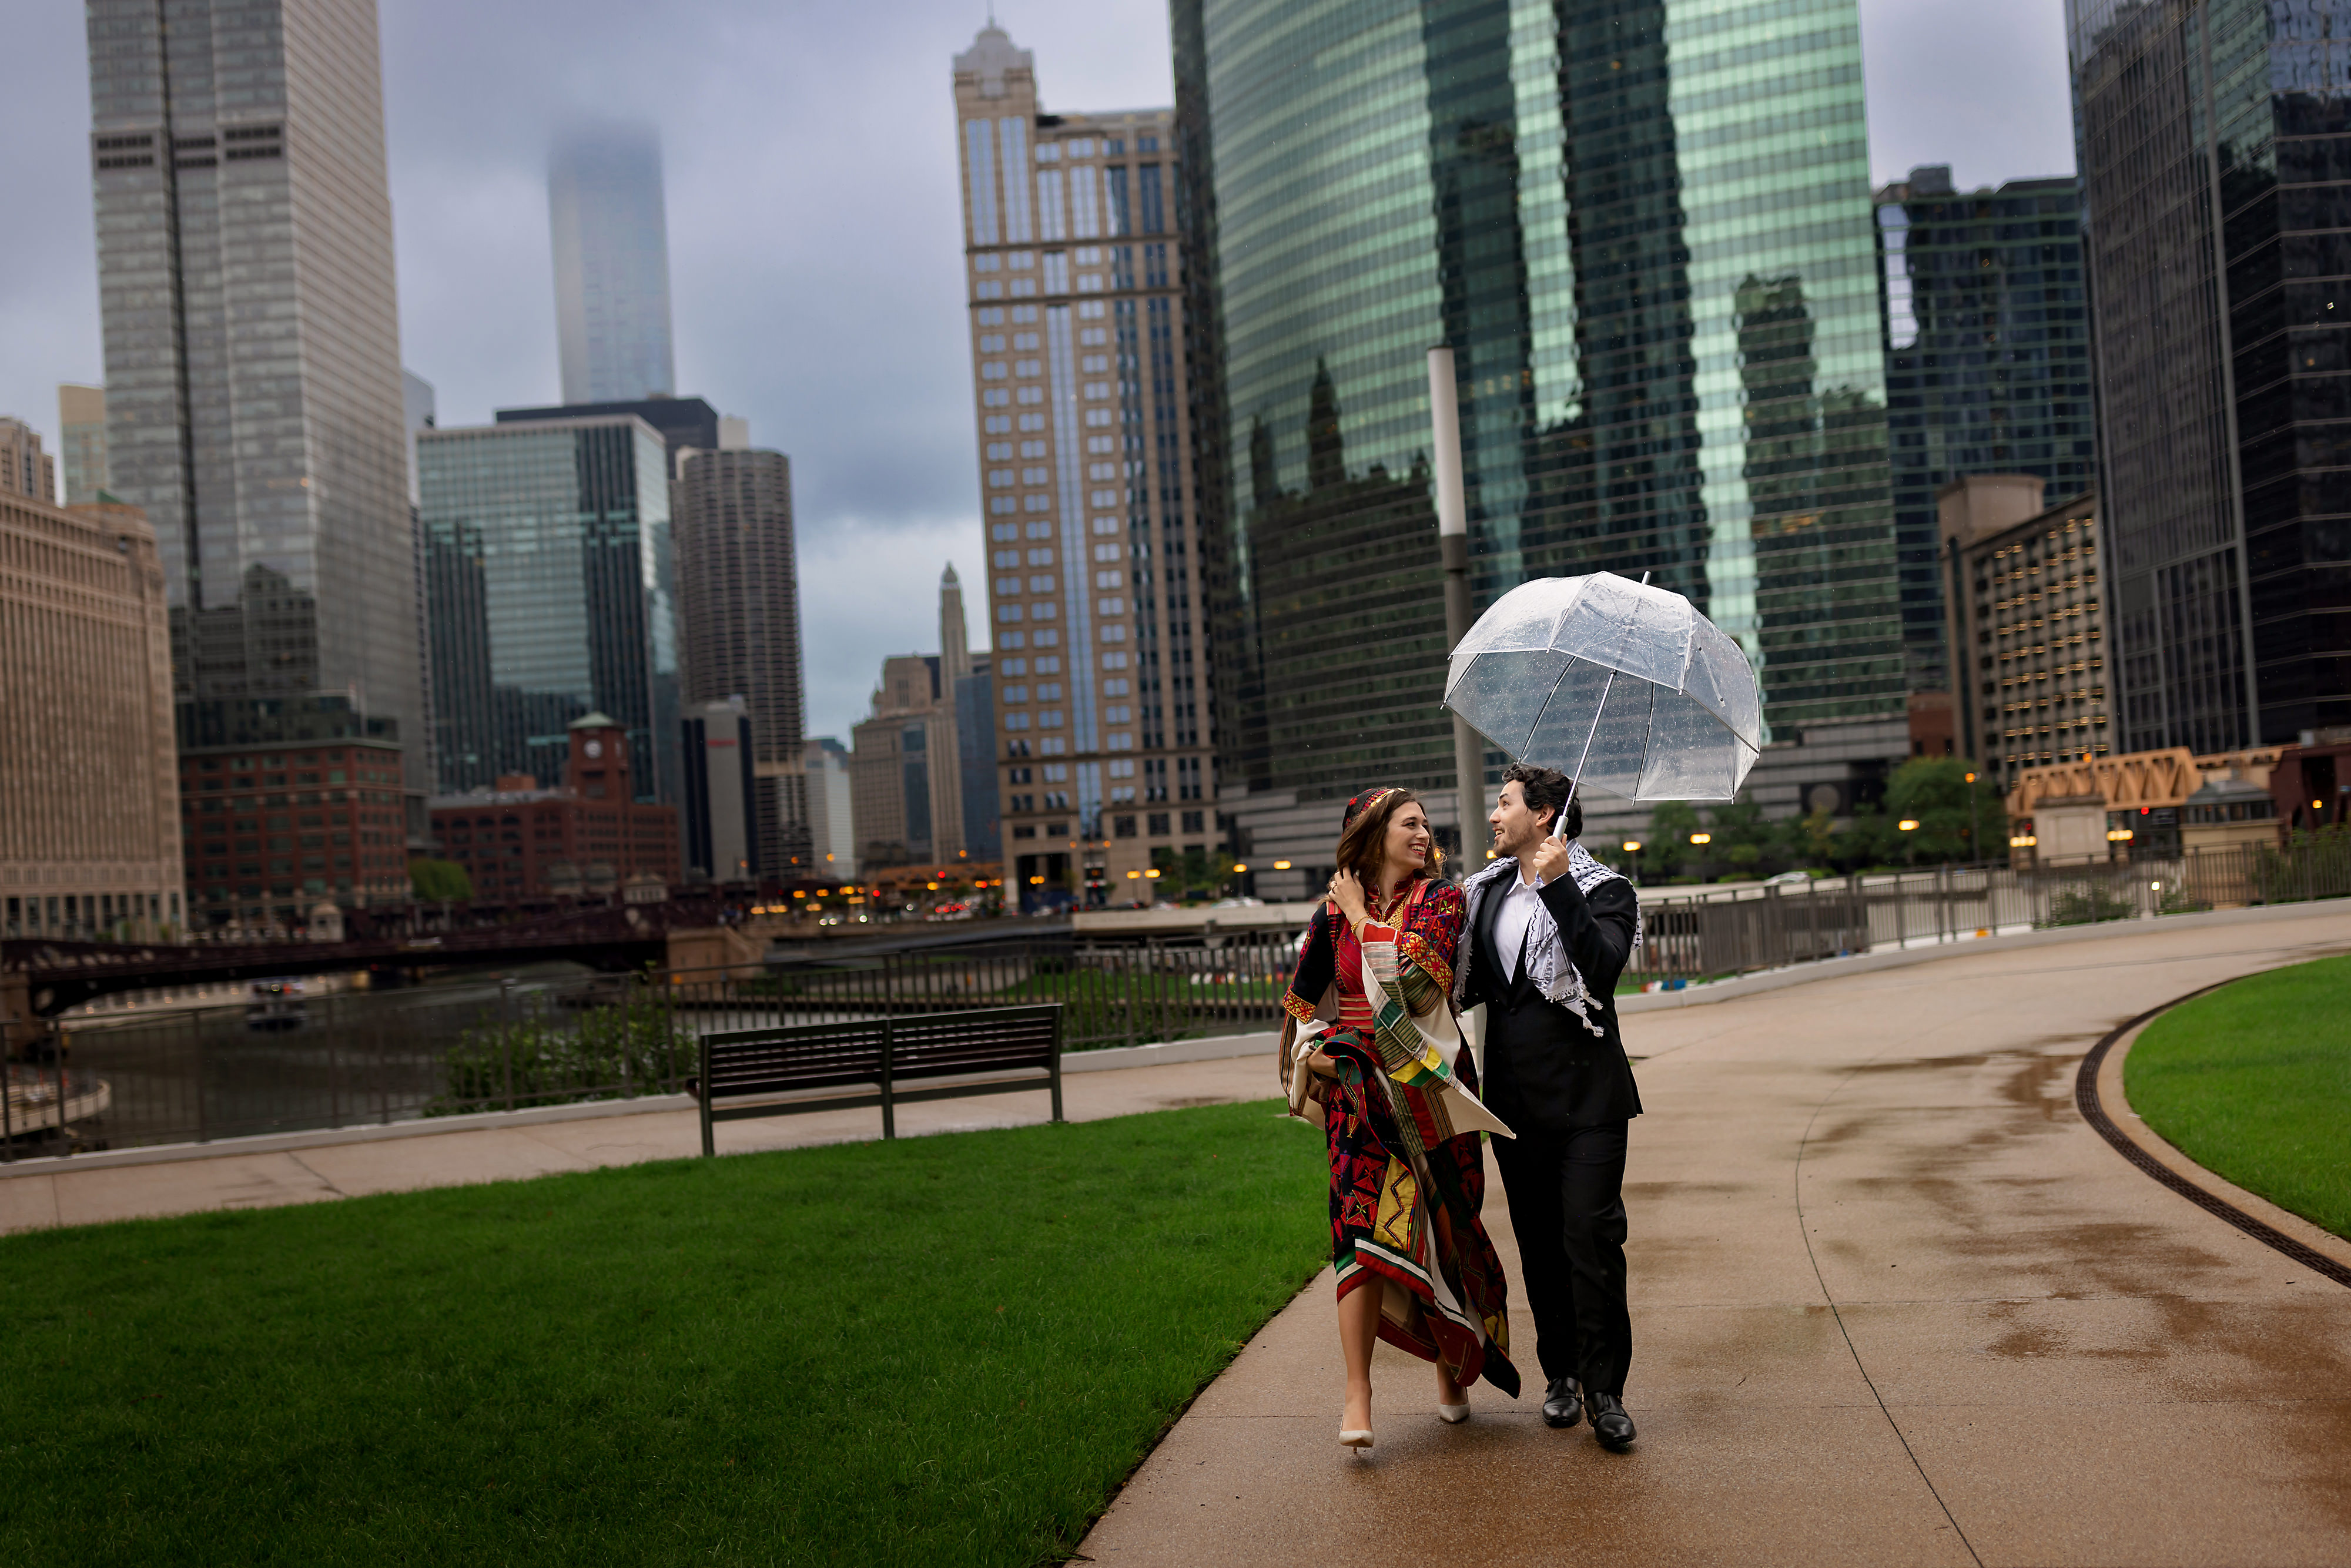 Bride and groom walk under umbrella near Gibson's Italia Plaza Riverwalk with the Chicago skyline and river in the background